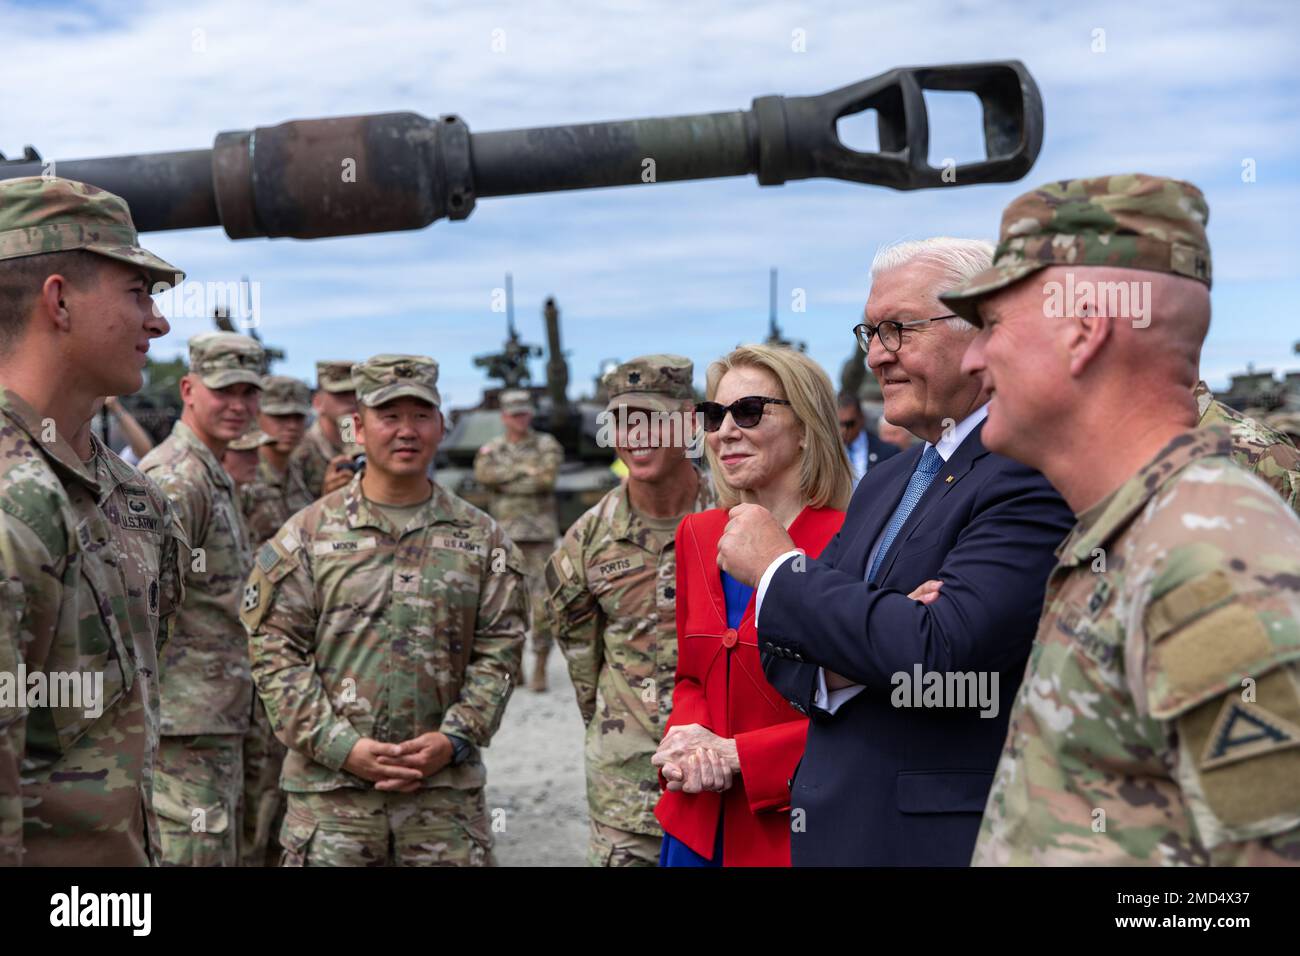 German President Frank-Walter Steinmeiers speaks with a 3rd Infantry Division, 1st Armor Brigade soldier, July 13, 2022, during a visit to 7th Army Training Command's Grafenwoehr Training Area. President Steinmeier traveled to 7 ATC to thank U.S. troops for their contributions to the freedom and security of Germany and its NATO allies in Europe, while also paying tribute to the importance of the transatlantic partnership between the U.S. and Germany. (Army photo by Sgt. Spencer Rhodes, 53rd Infantry Brigade Combat Team) Stock Photo